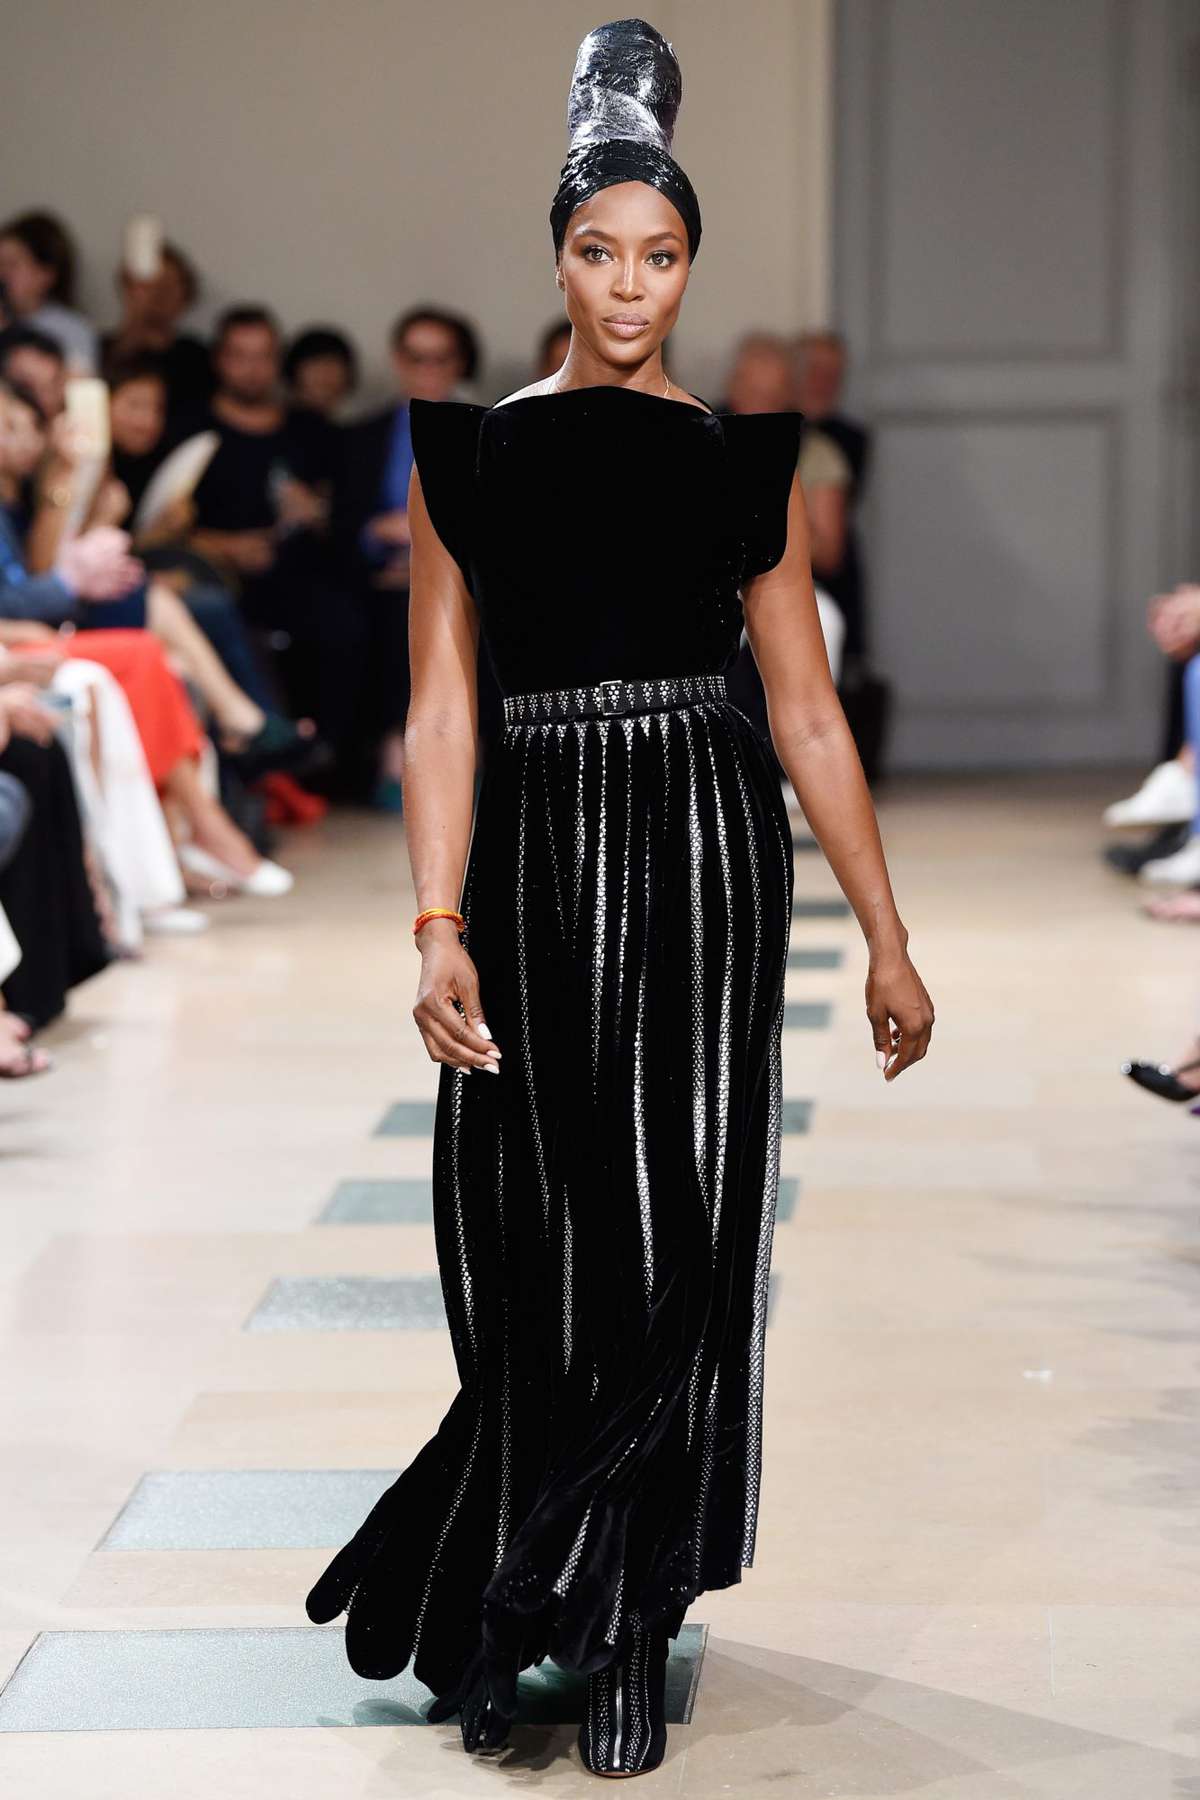 Naomi Campbell Walks Azzedine Alaia's Couture Show | InStyle